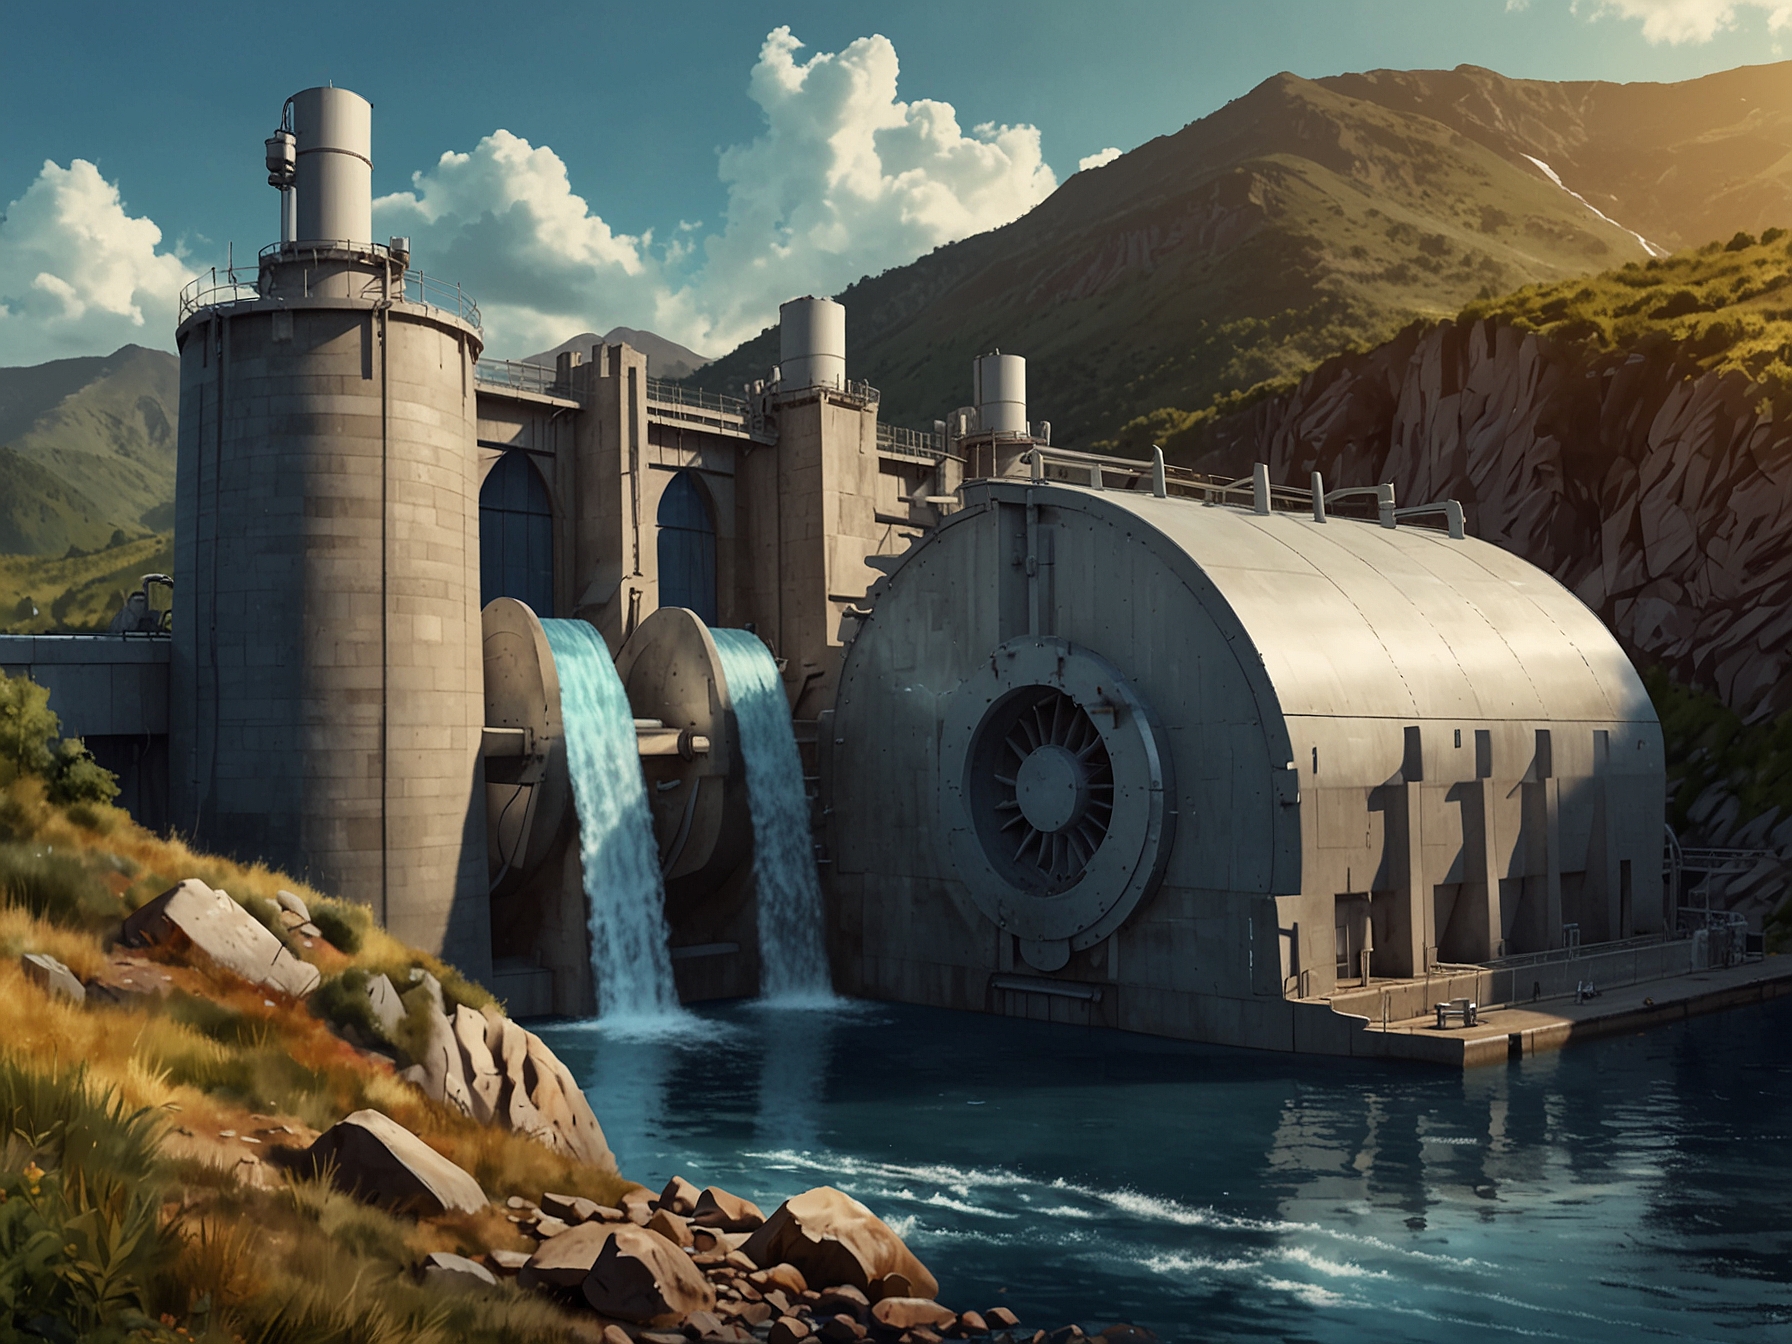 An illustration of a hydropower plant, representing NHPC's core business and its importance in the renewable energy sector, attracting investor interest.